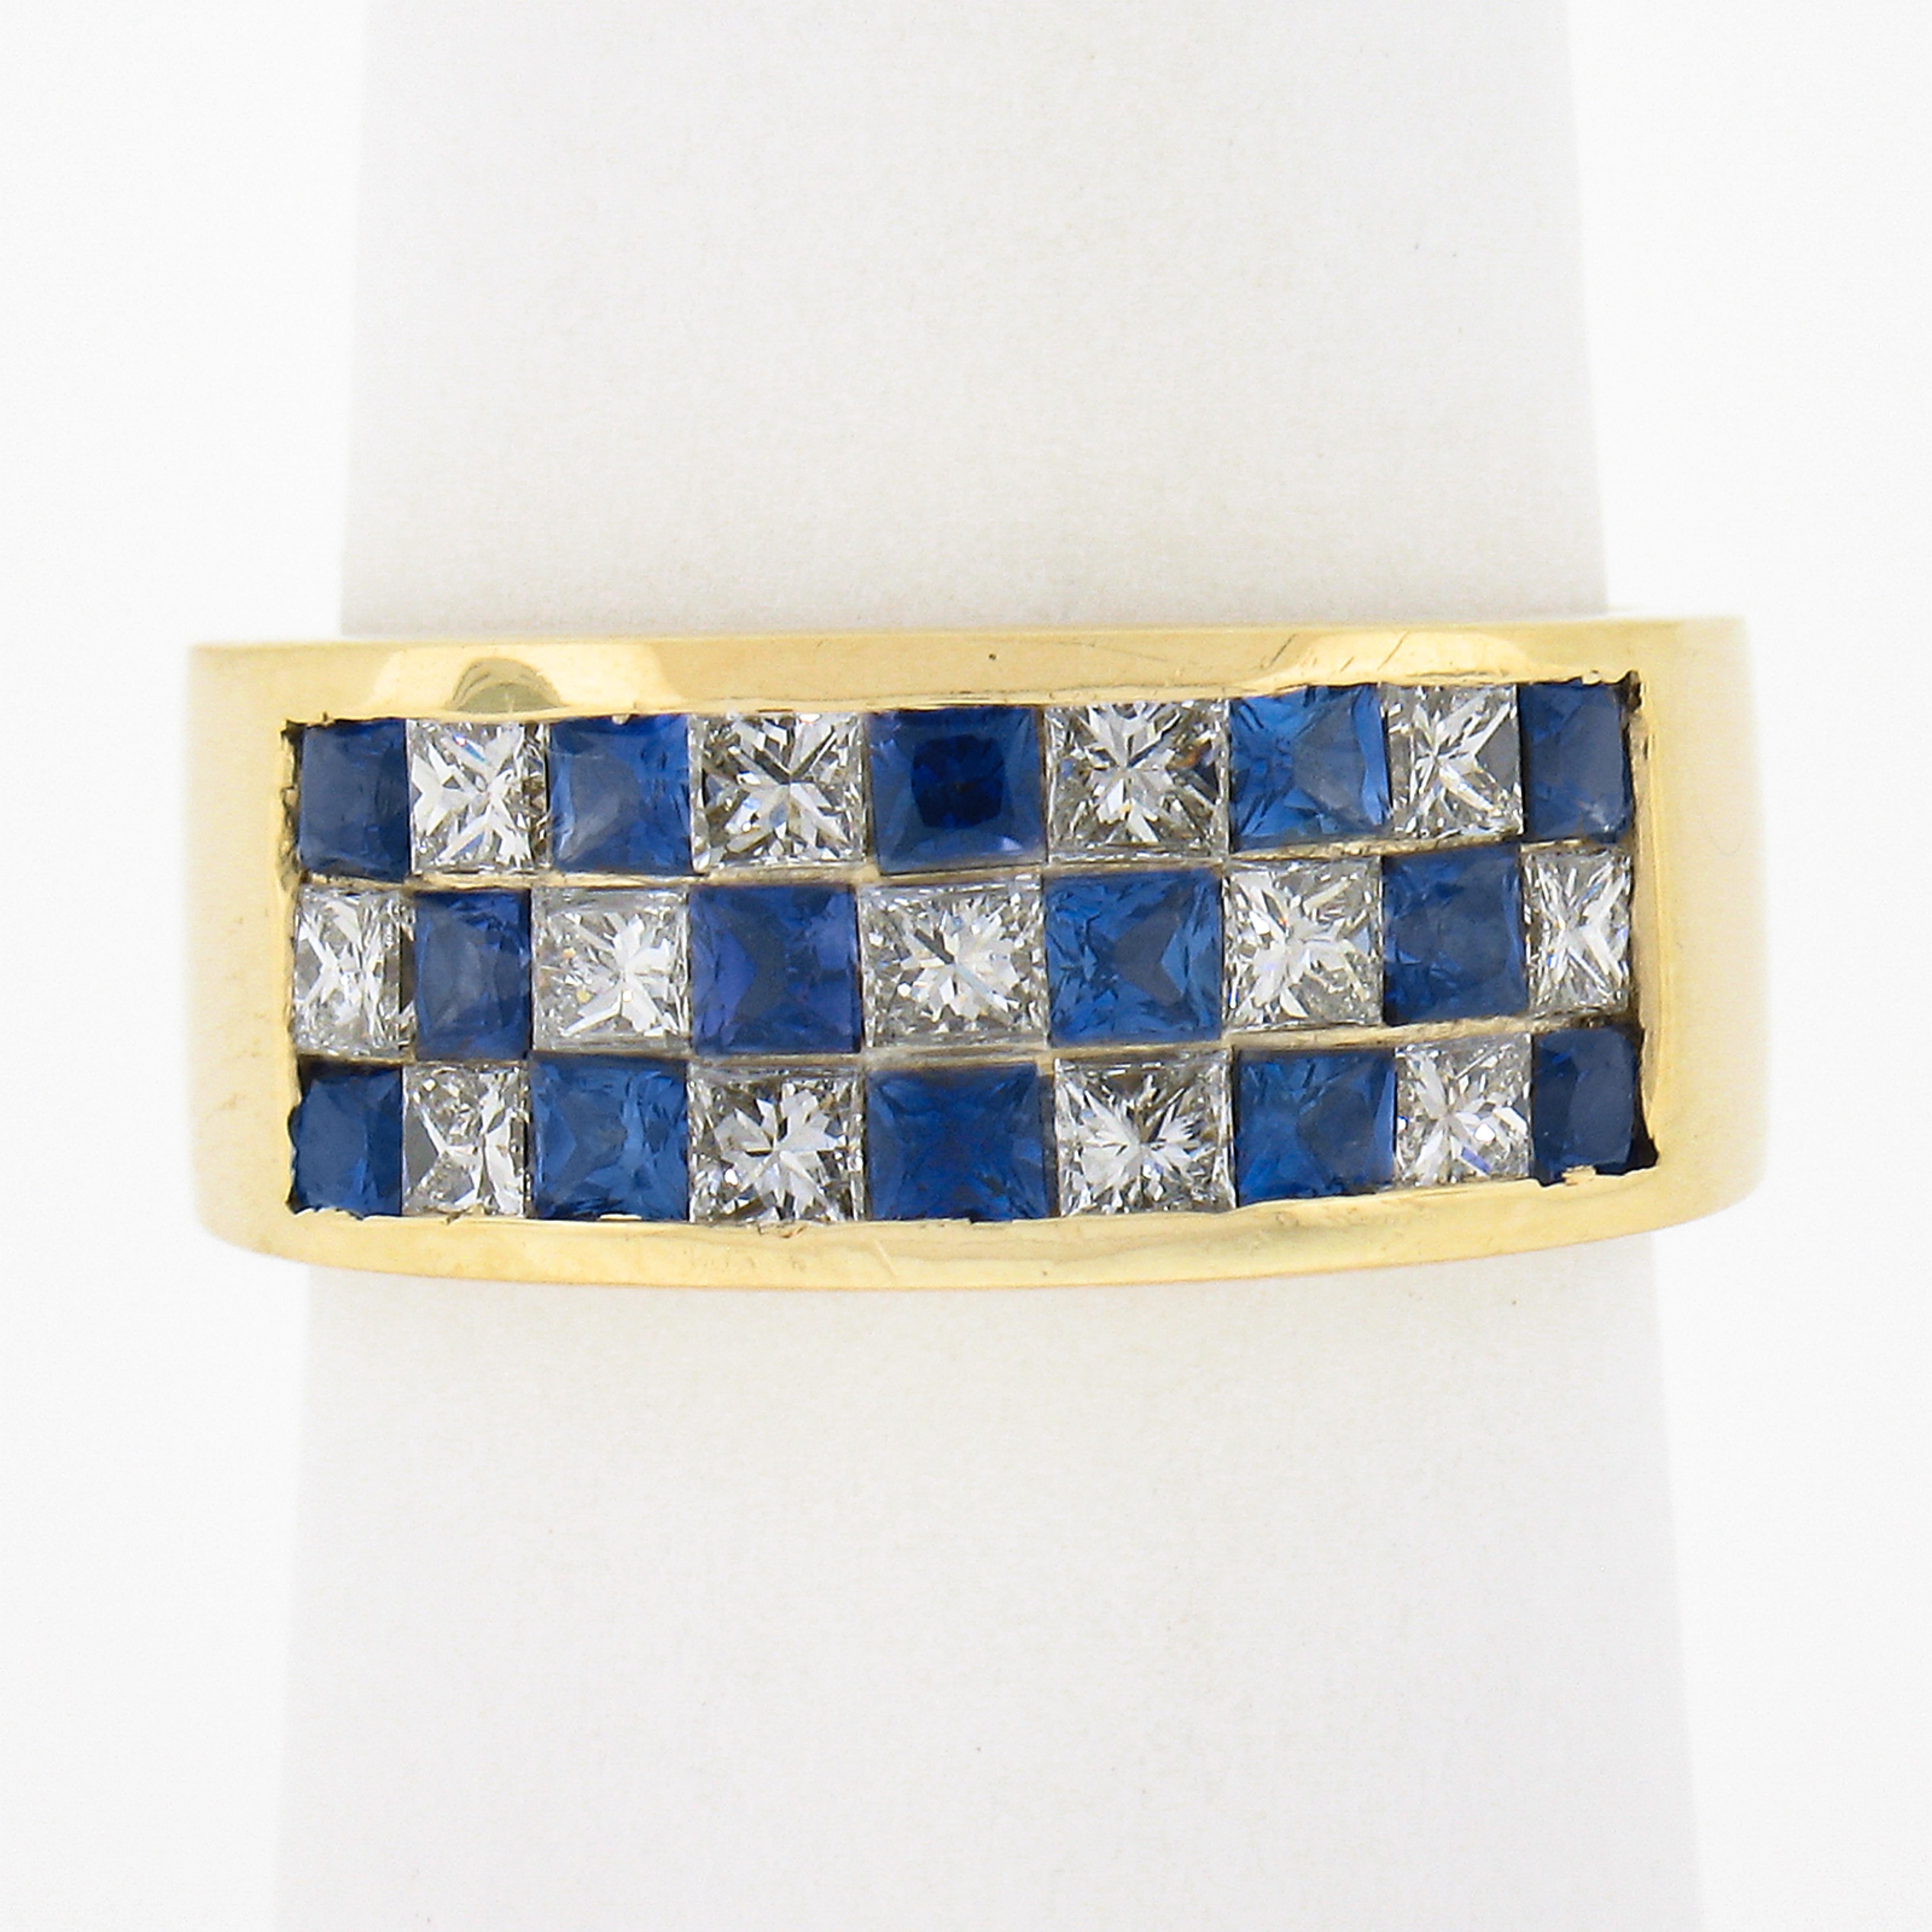 This beautiful wide ring is crafted in solid 18k yellow gold and features a like checkerboard style 3 rows of alternating very fine quality square cut sapphires and diamonds. The sapphires are well matched showing amazing blue color for a super rich